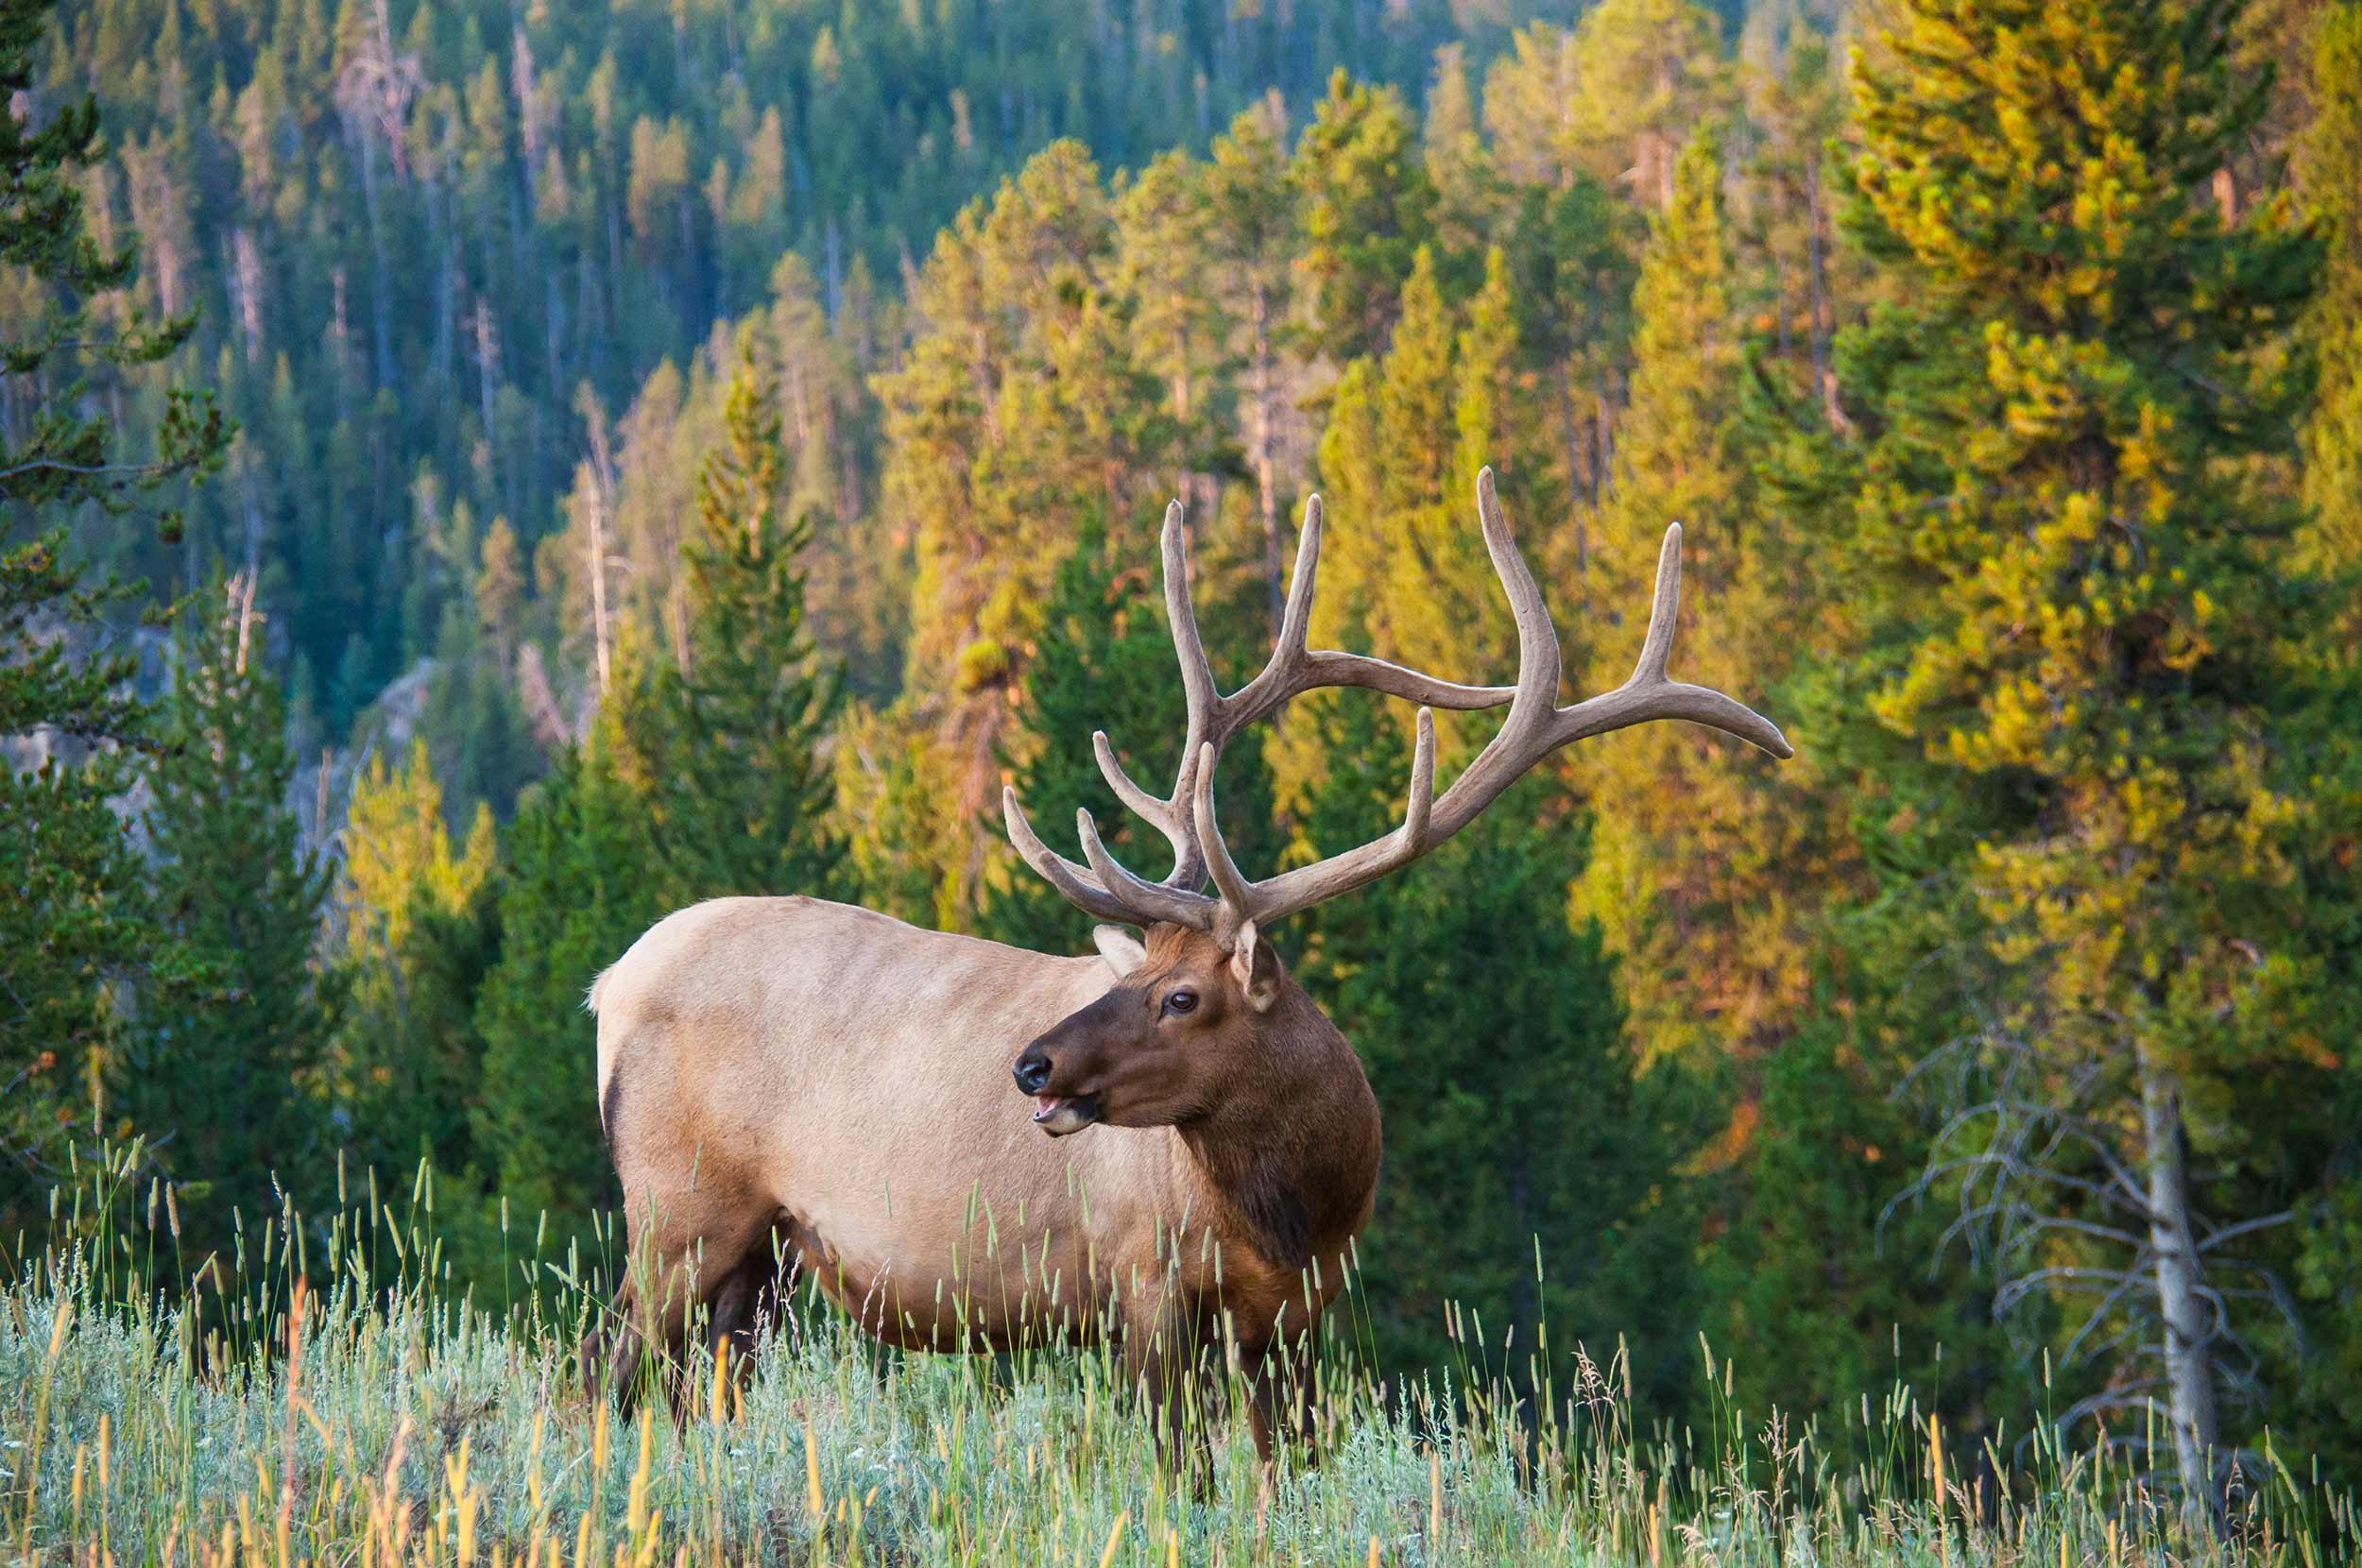 Bull elk on mountainside with fall foliage